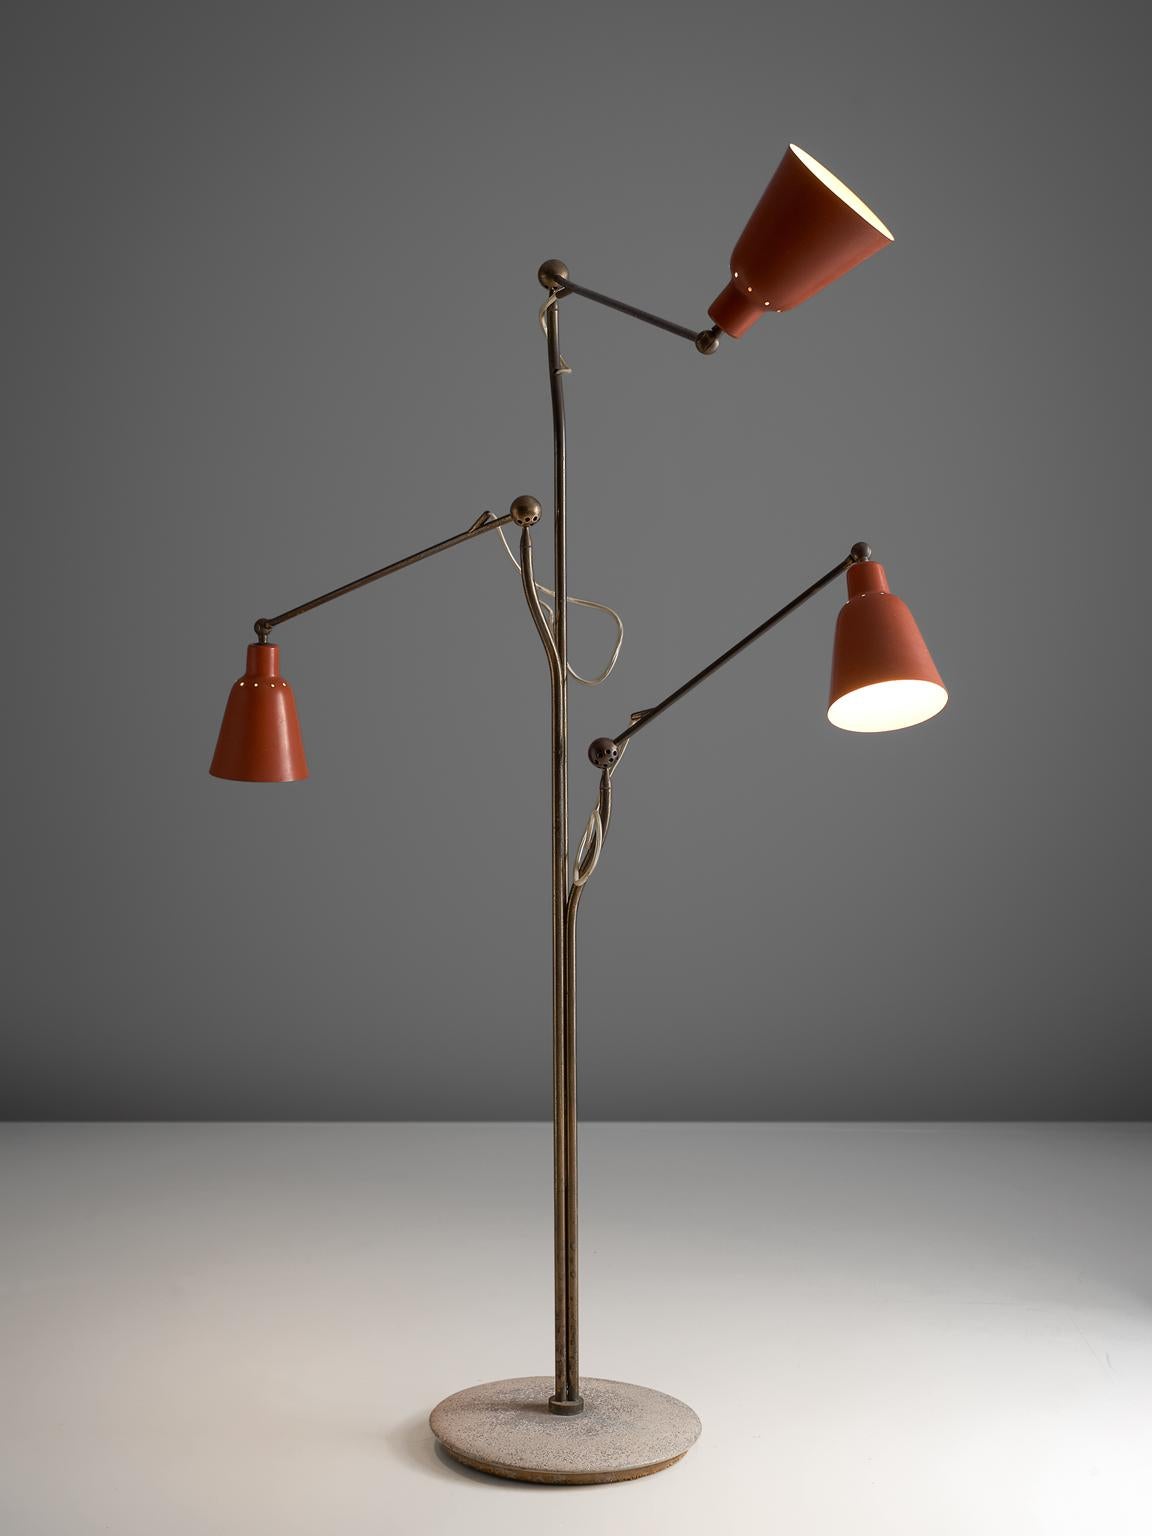 Angelo Lelii for Arredoluce, floor lamp, metal, brass, metal, Italy, 1950s

This iconic floor lamp was designed by Angelo Lelli and manufactured by Arredoluce, Italy in 1950. This lamp was a symbol of the 1950s, due to its fixtures. It was